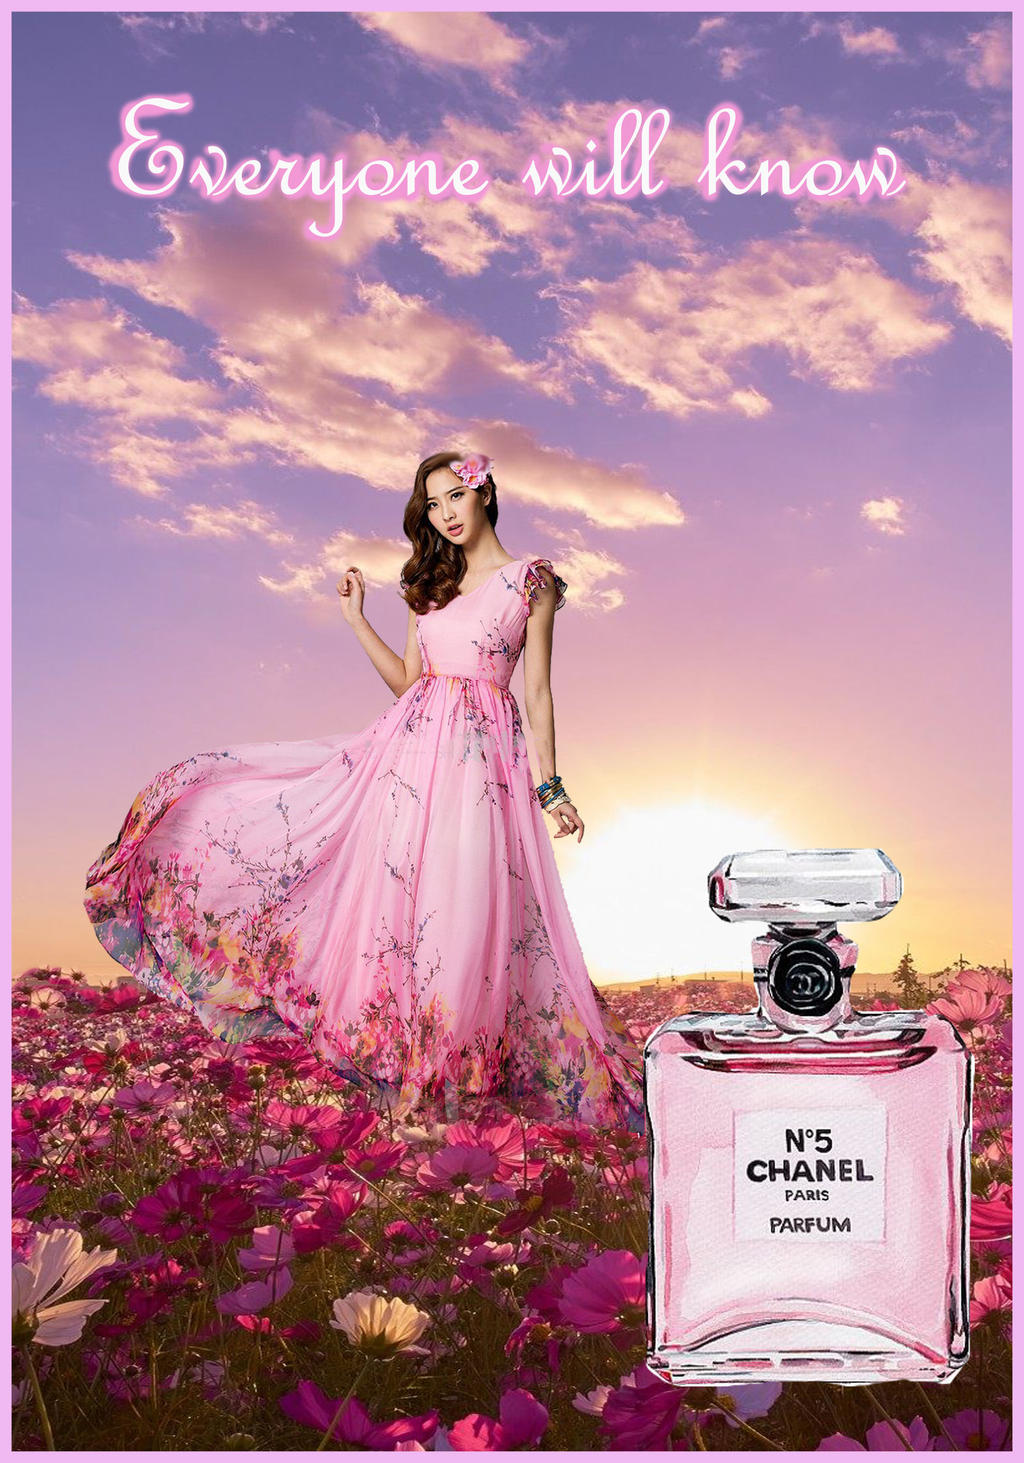 Chanel # 5 Pink ad by DravenRavenCrow on DeviantArt